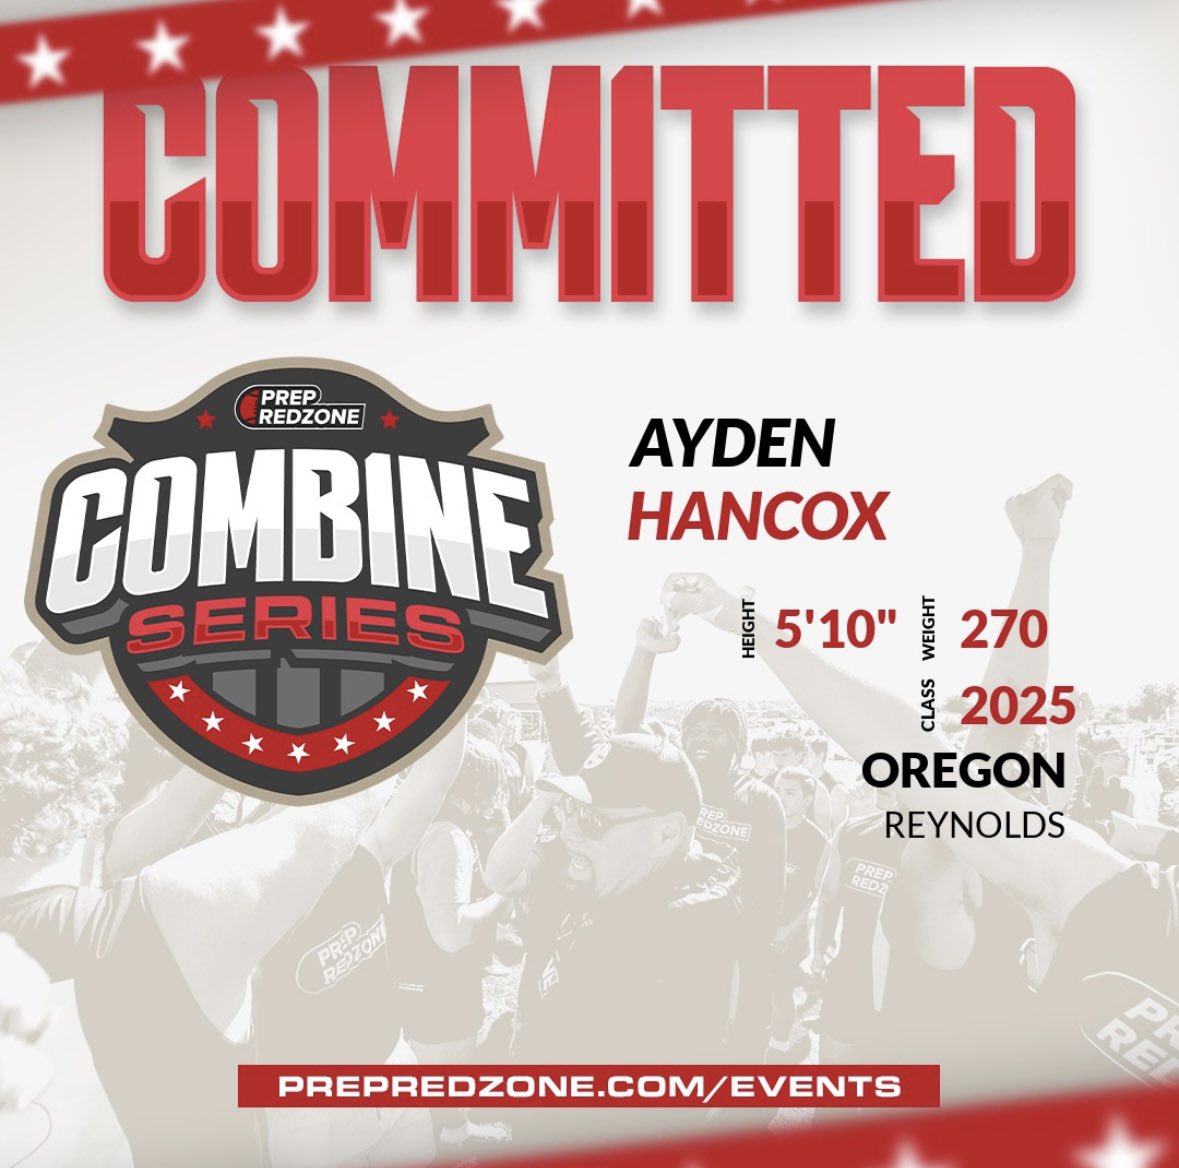 I will be participating in the combine series at lakeridge hs on may 18th . @PrepRedzoneOR @JordanJ_ @AndrewNemec @NickFarman55 @ConnorDarby57 @ChadSimmons_